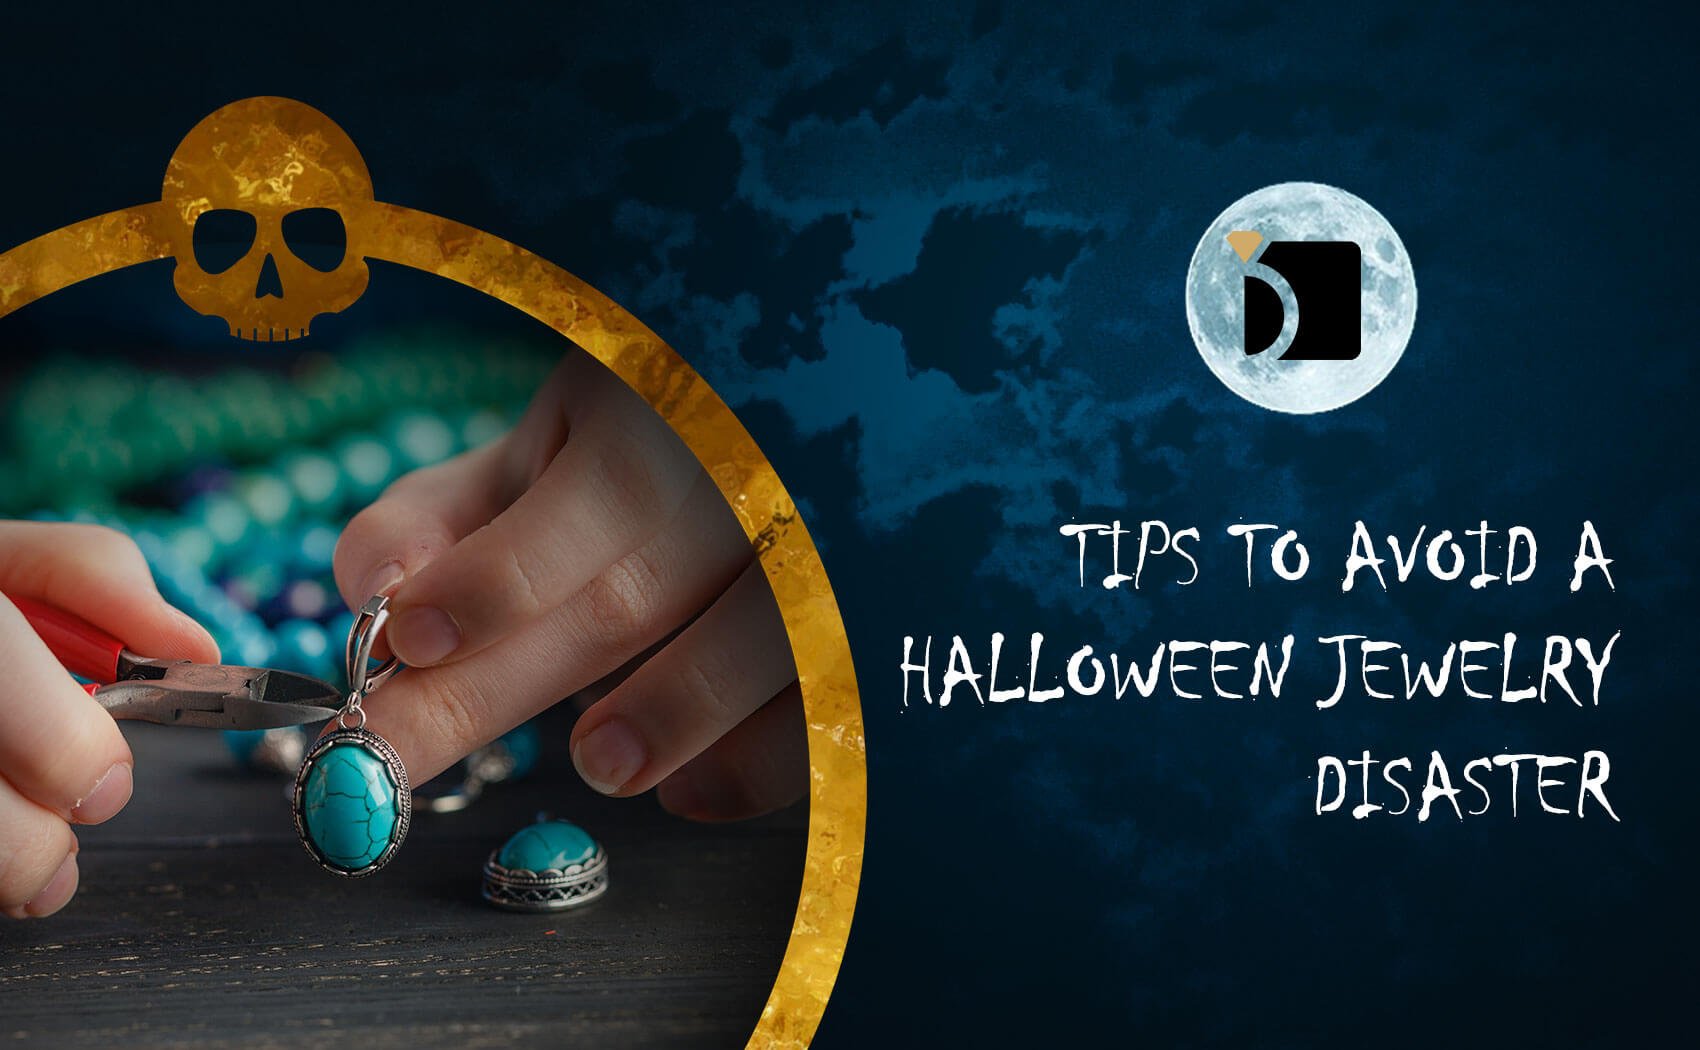 Tips to Avoid a Halloween Jewelry Disaster